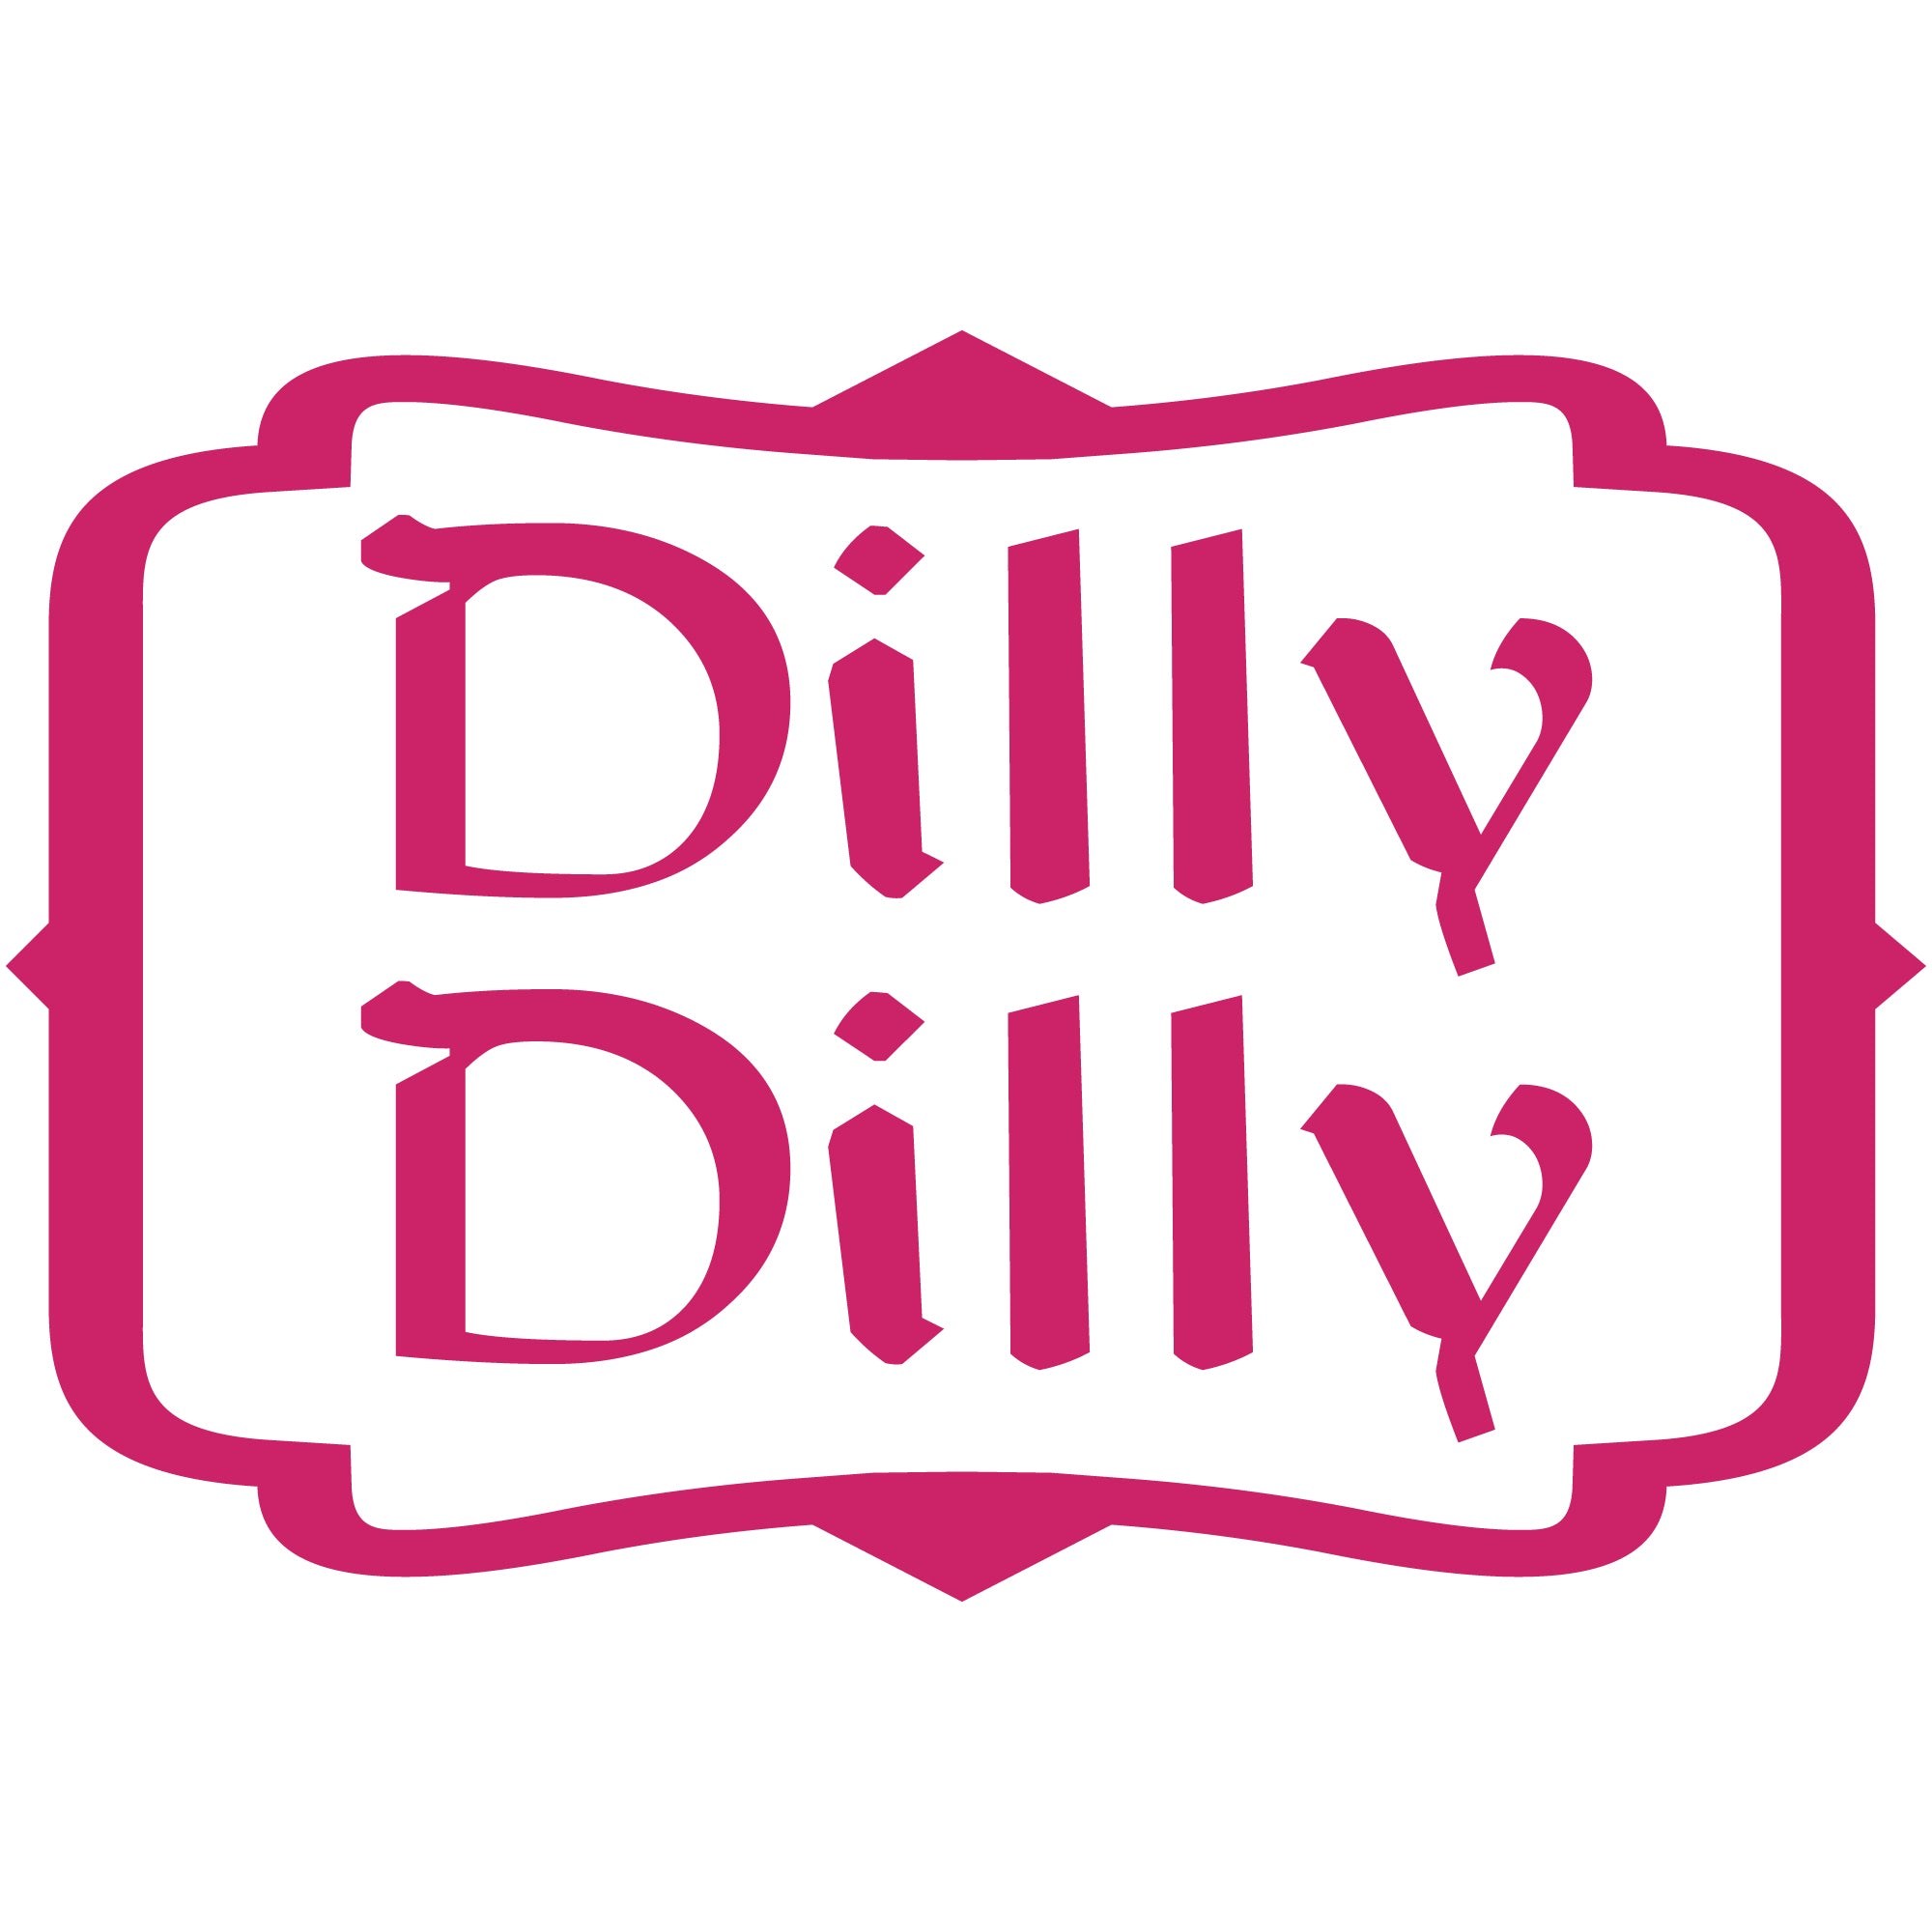 Dilly Dilly (Light Calligraphy Font) - Bud Light Inspired - Vinyl Decal Sticker